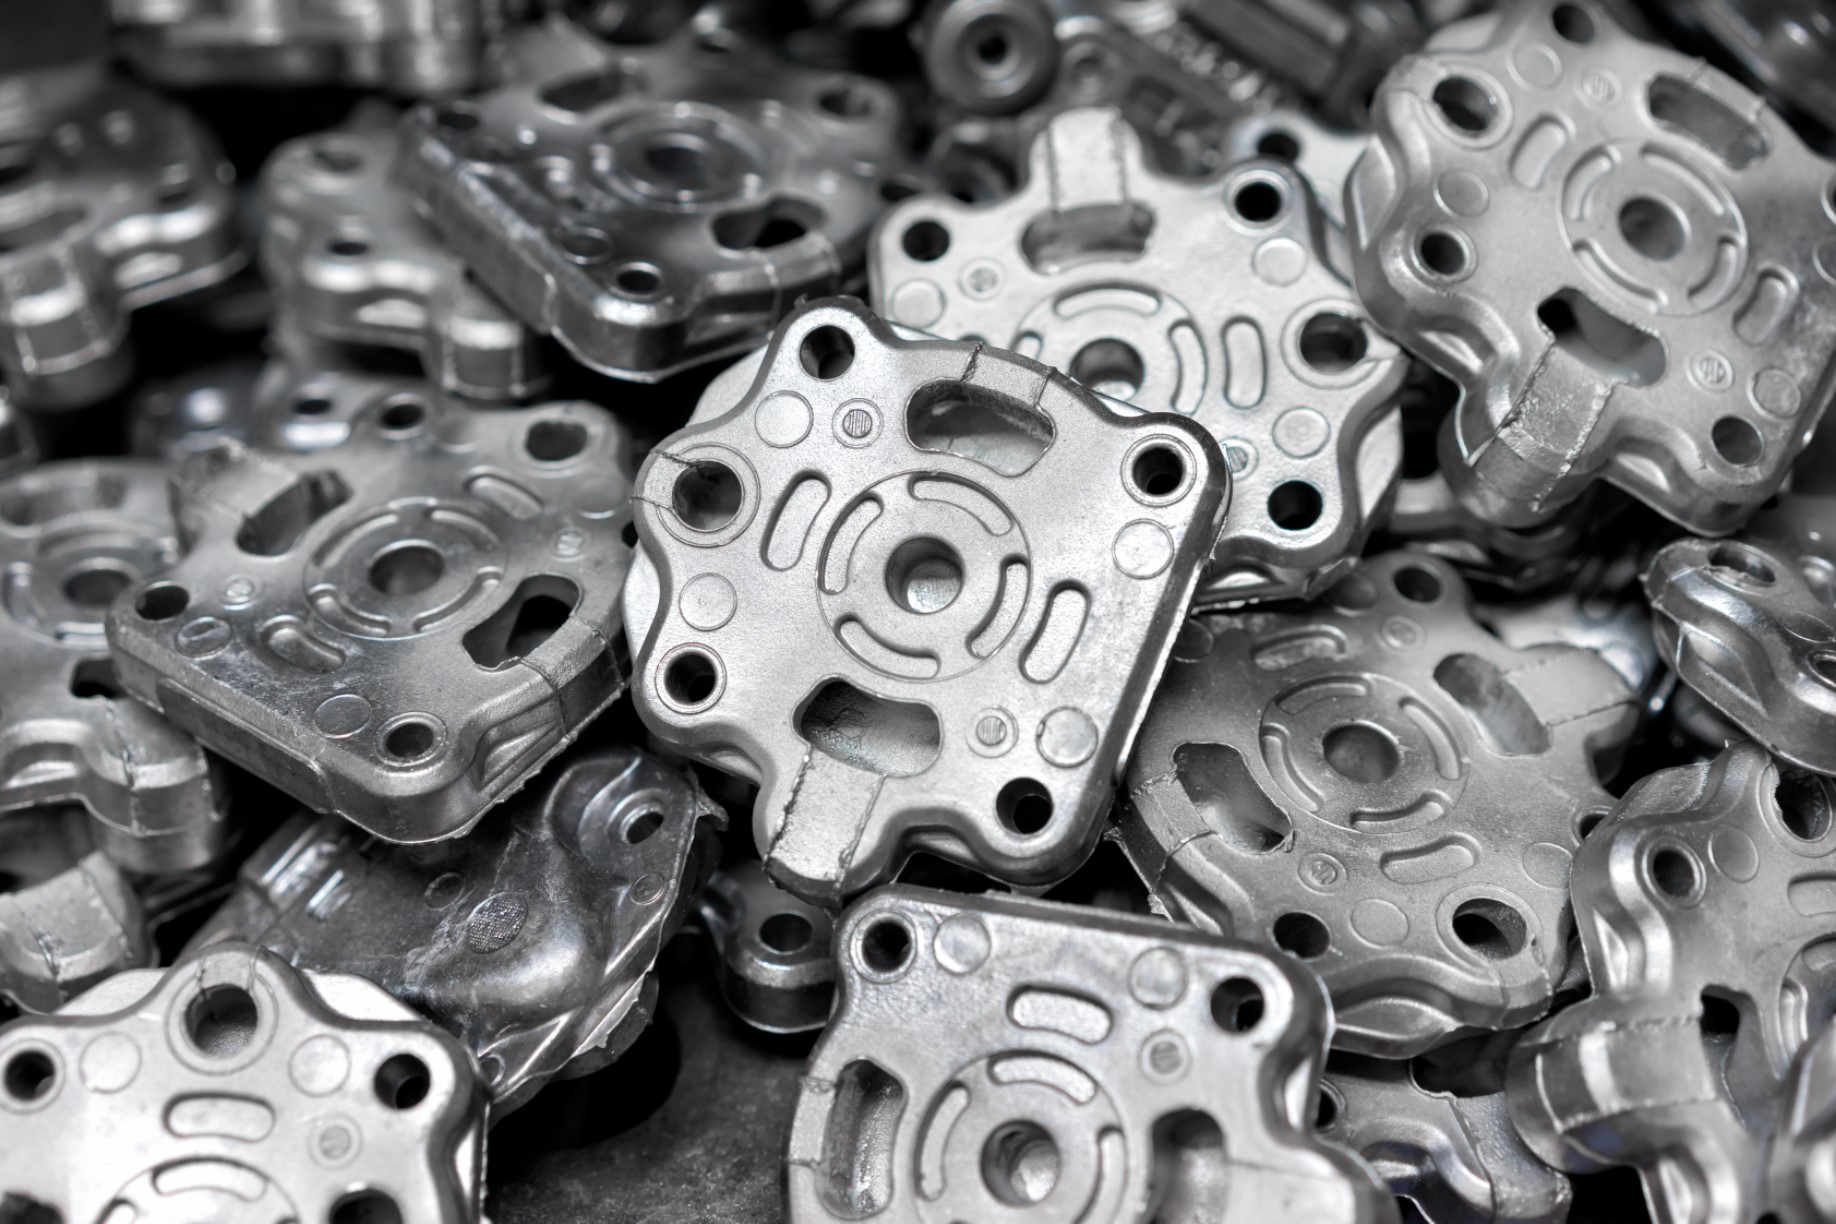 DC Pile Of Aluminum Automotive Parts, Casting Process In The Automotive Industry Factory